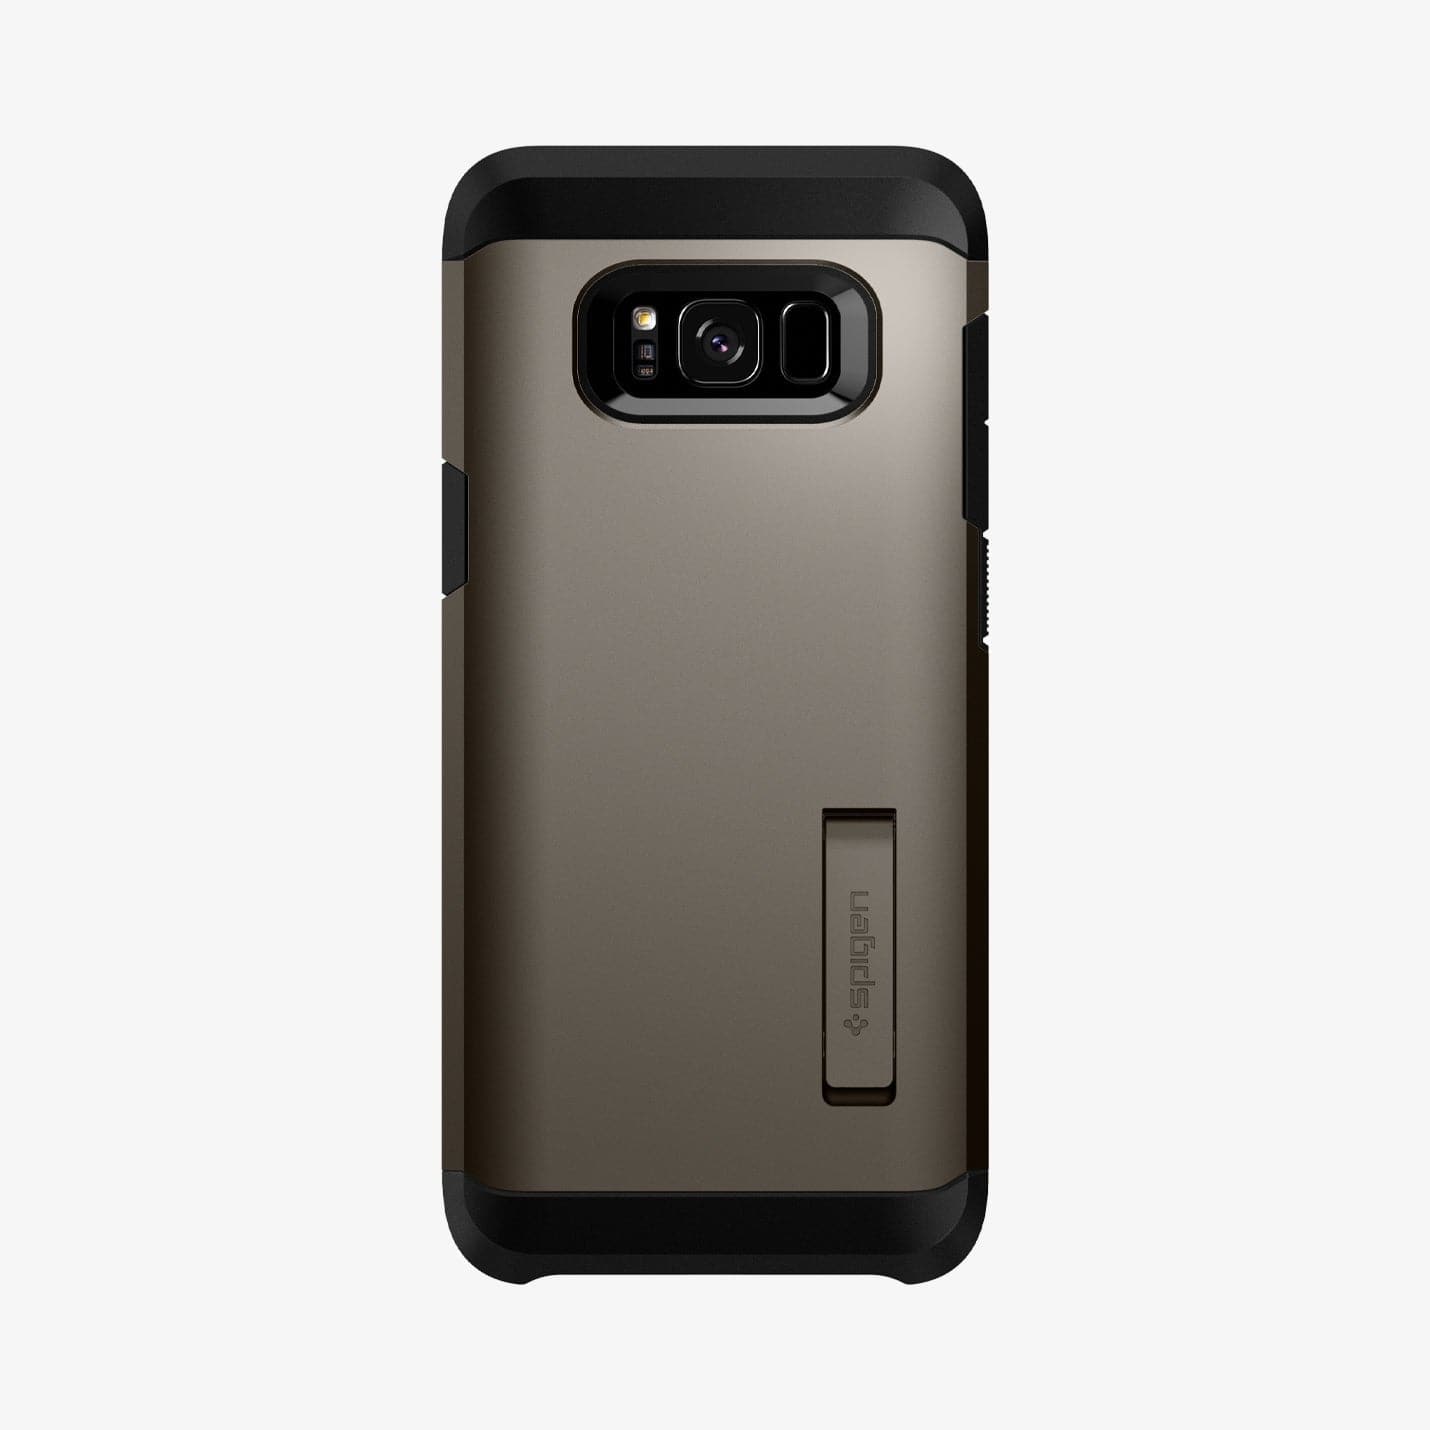 565CS21641 - Galaxy S8 Series Tough Armor Case in gunmetal showing the back